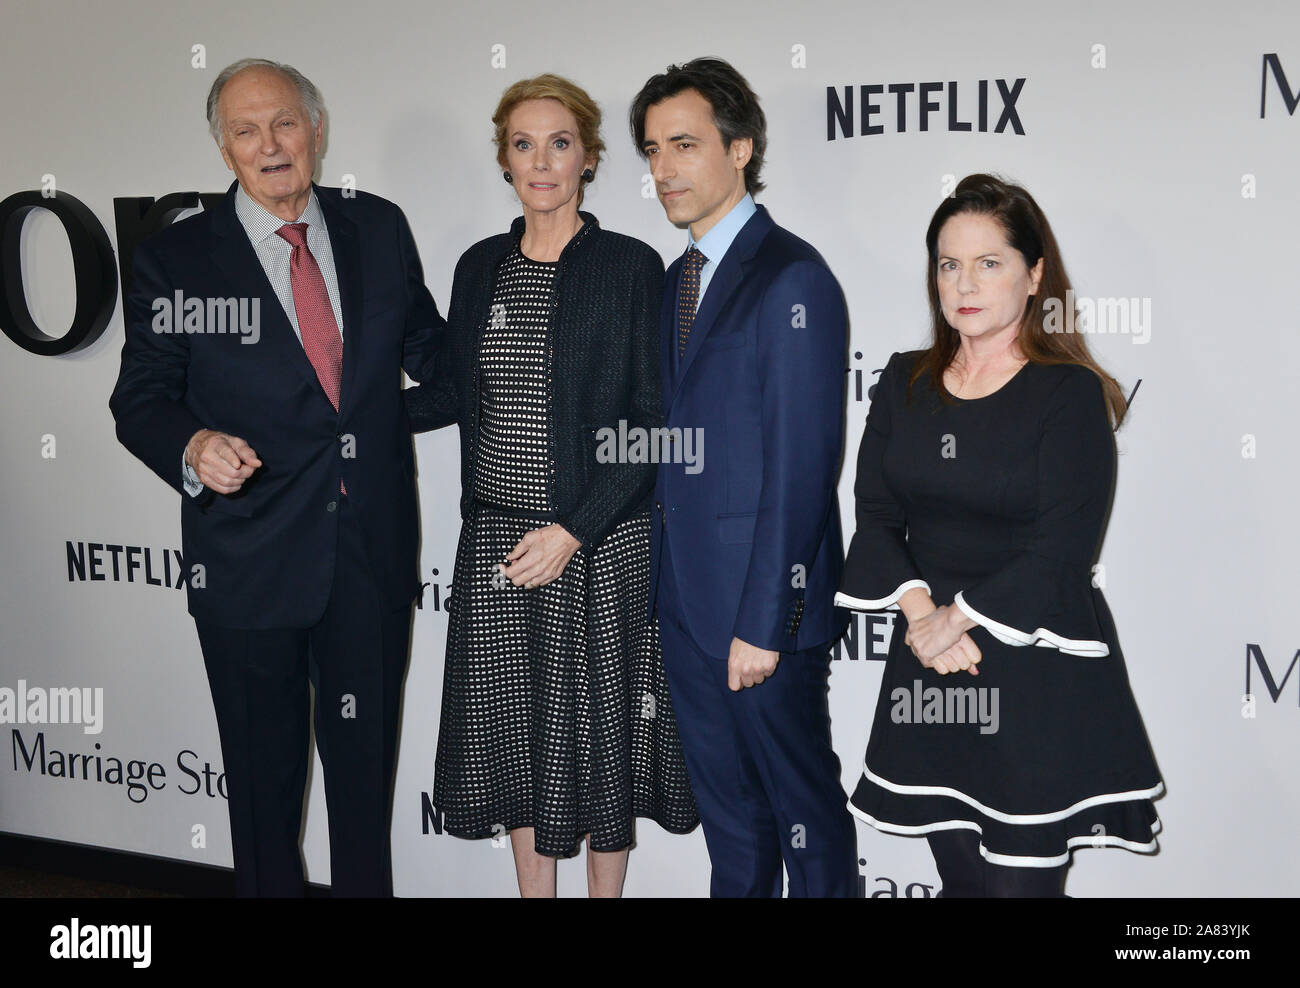 Los Angeles, USA. 05th Nov, 2019. lan Alda, Julie Hagerty, Noah Baumbach, Martha Kelly arrives at the Premiere Of Netflix's 'Marriage Story' at DGA Theater on November 05, 2019 in Los Angeles, California. Credit: Tsuni/USA/Alamy Live News Stock Photo